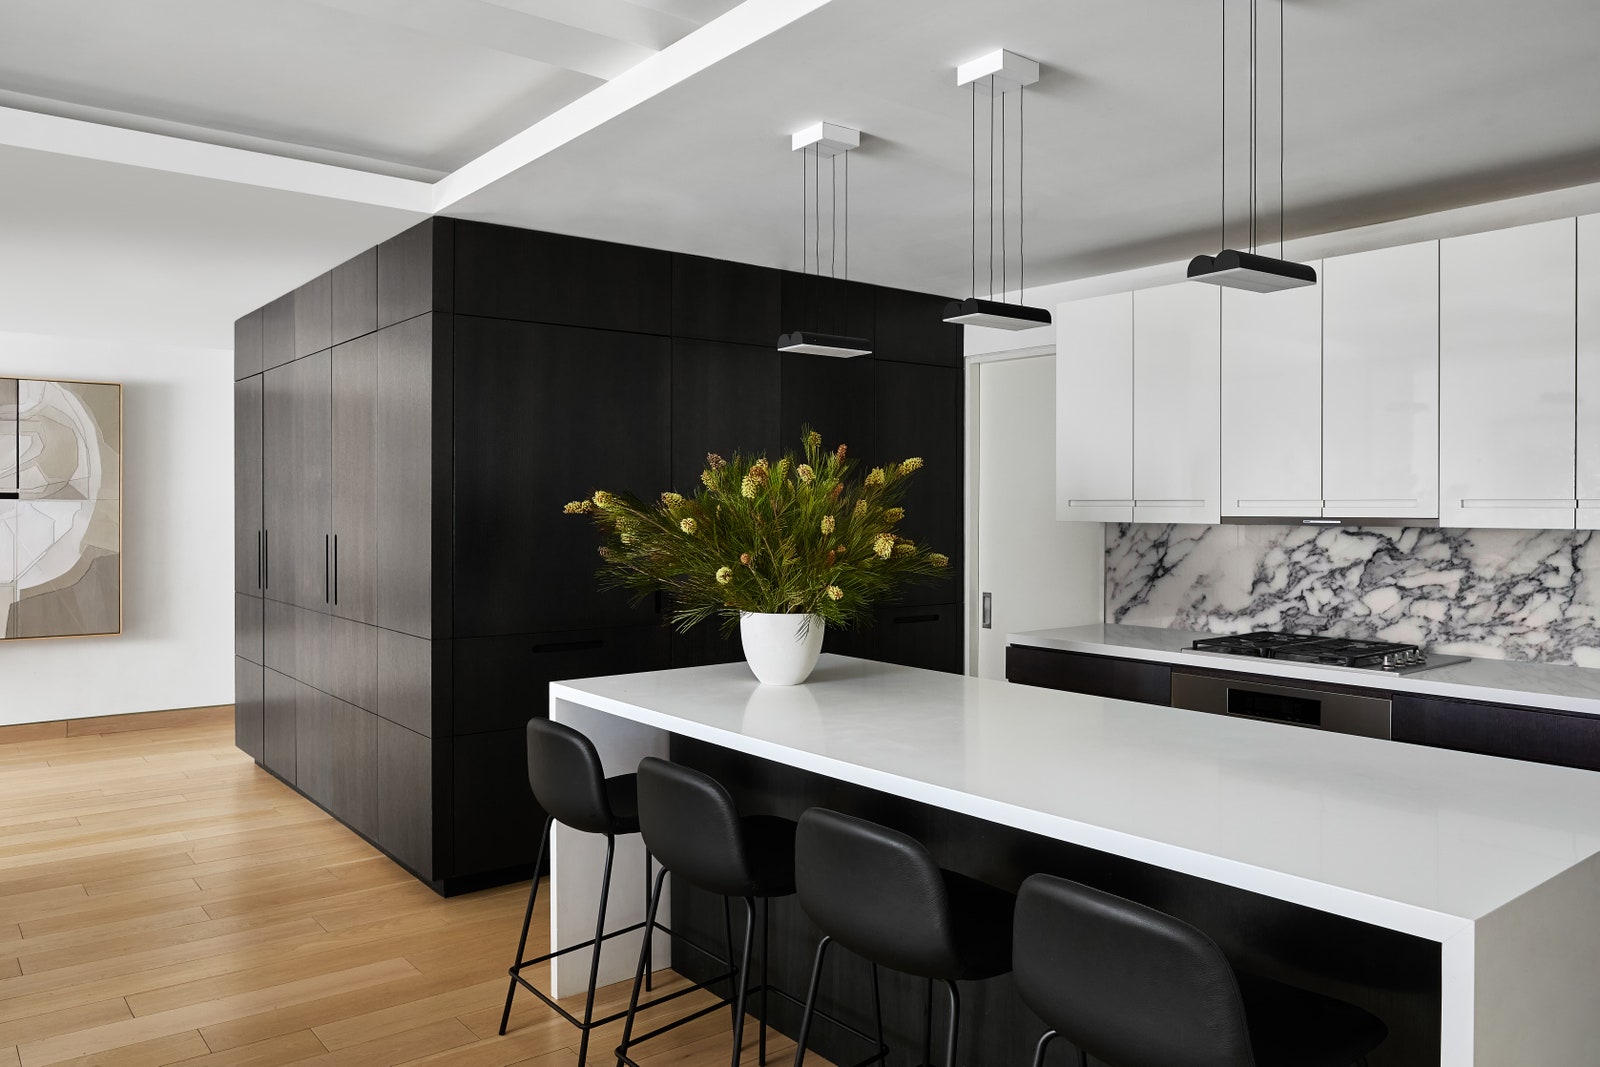 In this prewar apartment renovation interiors whiz Justin Charette opted for both black and white cabinets—and the...